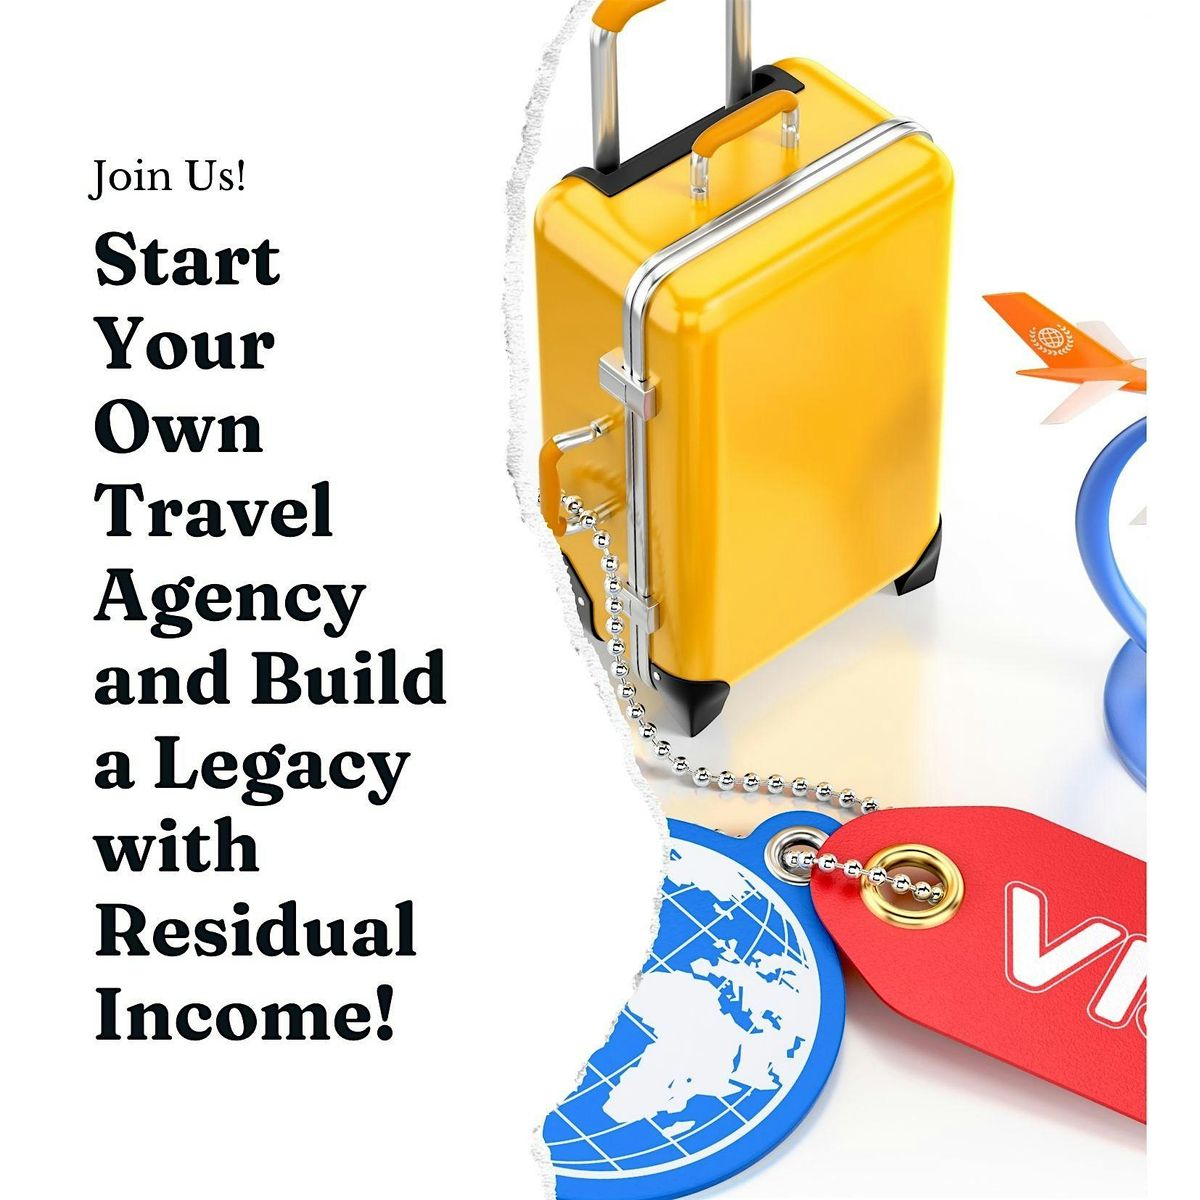 Start Your Own Travel Agency and Build a Legacy!